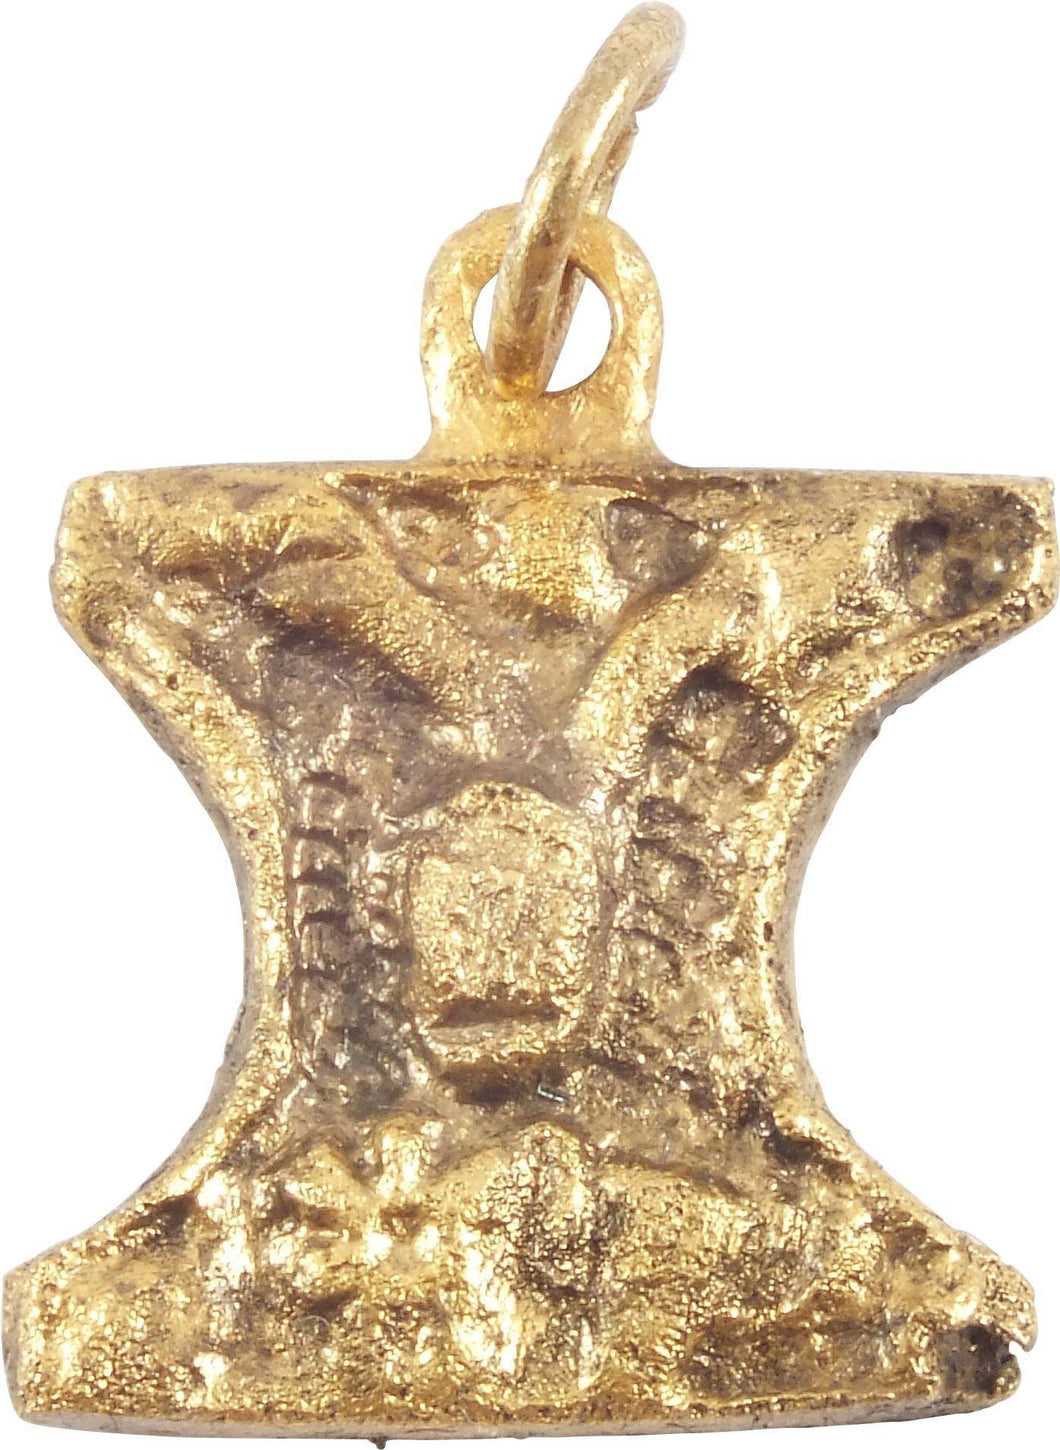 MEDIEVAL CHRISTIAN PENDANT NECKLACE C.1200-1400 AD - Picardi Jewelers